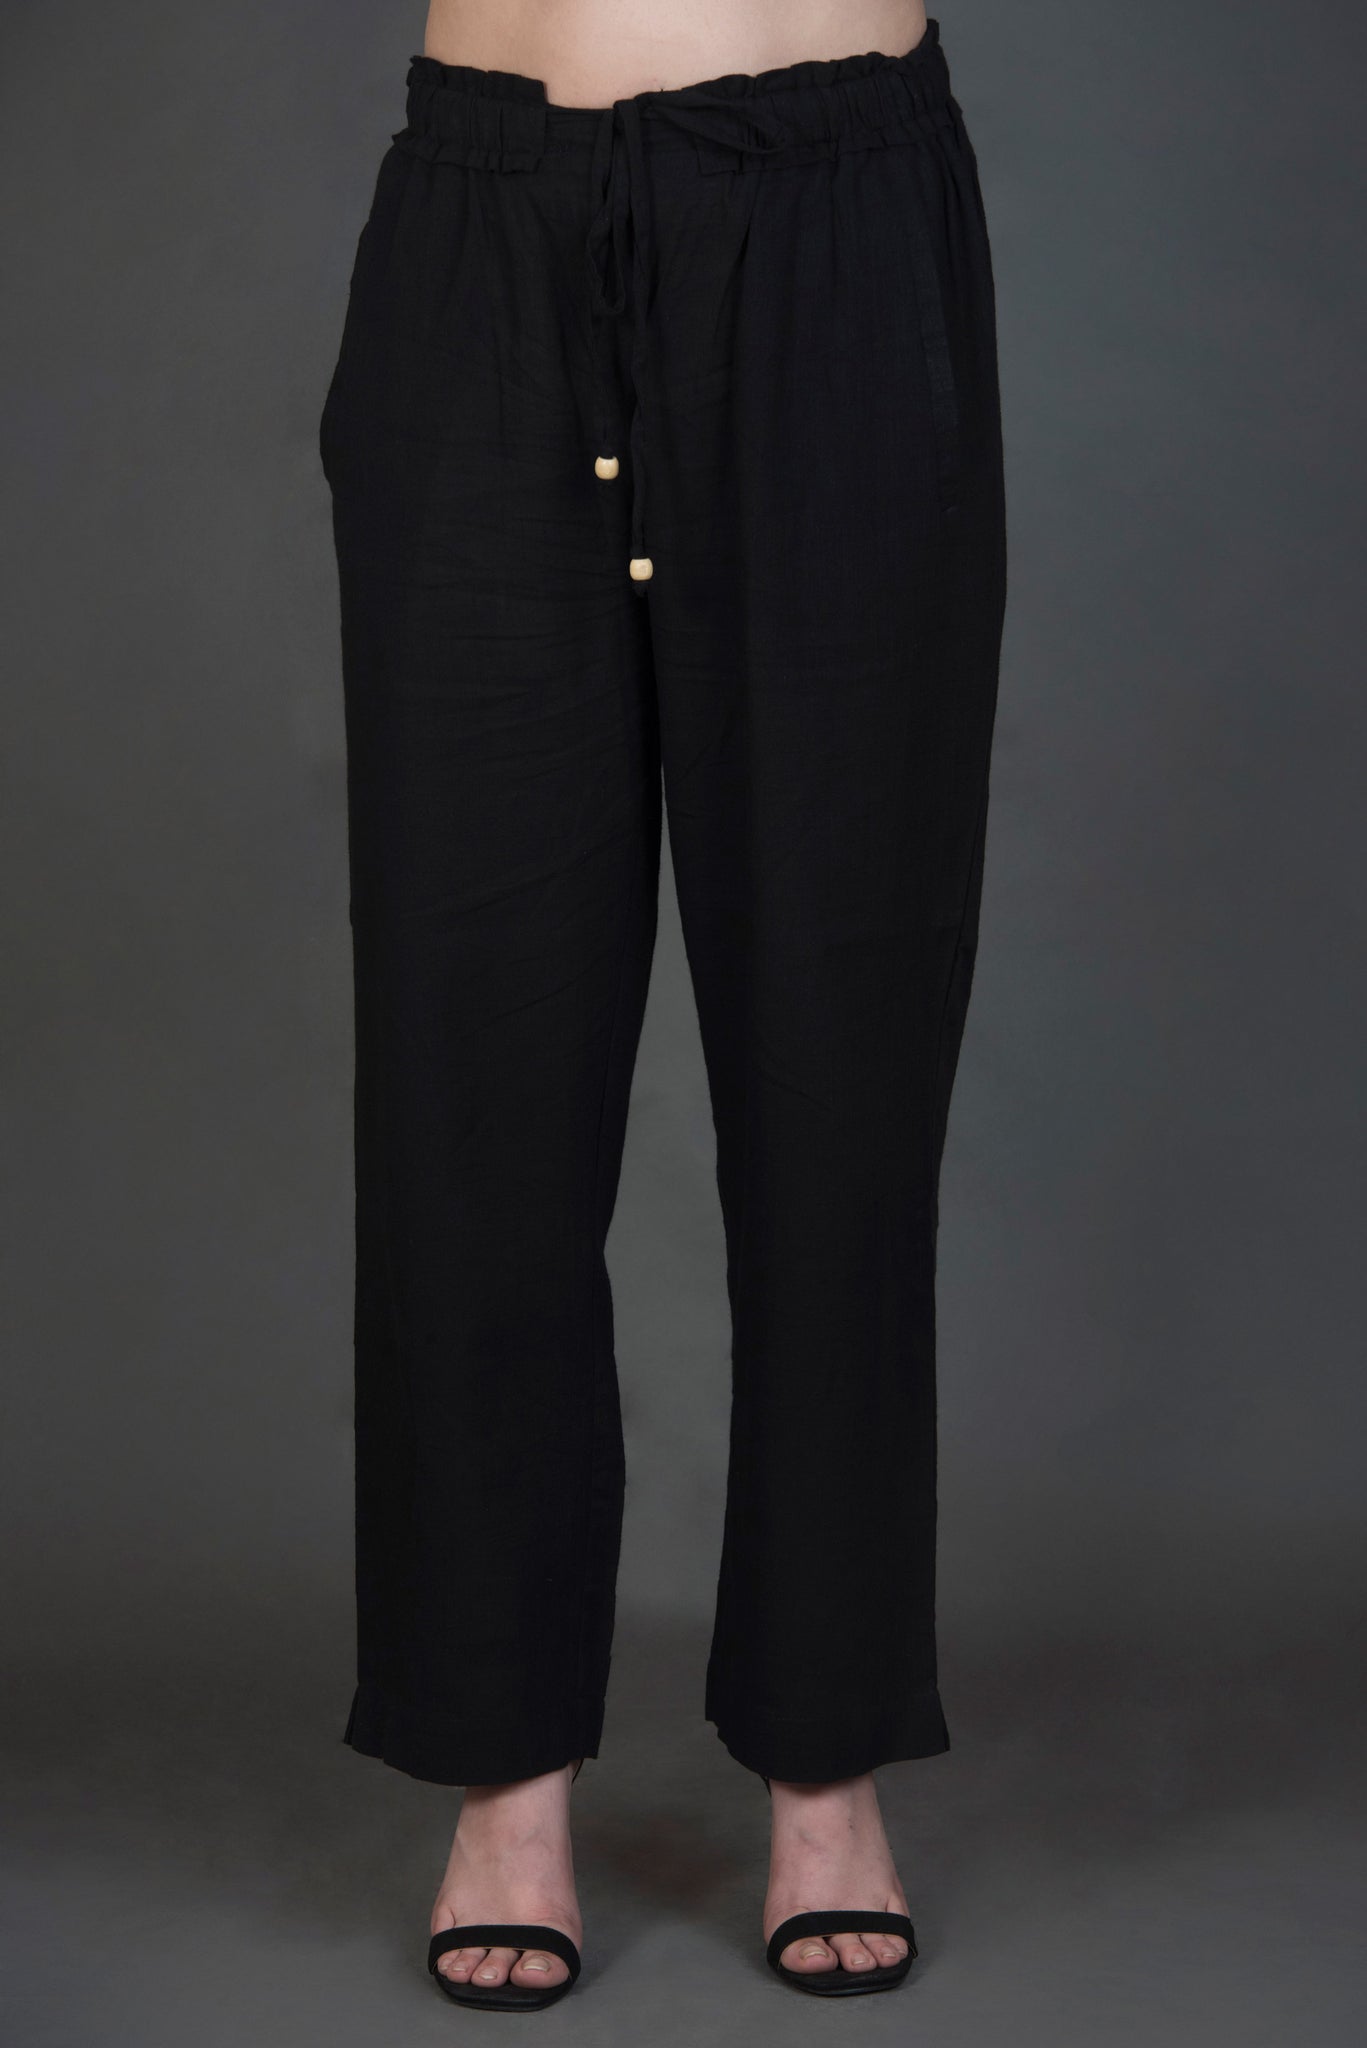 Black Solid Pants with pocket